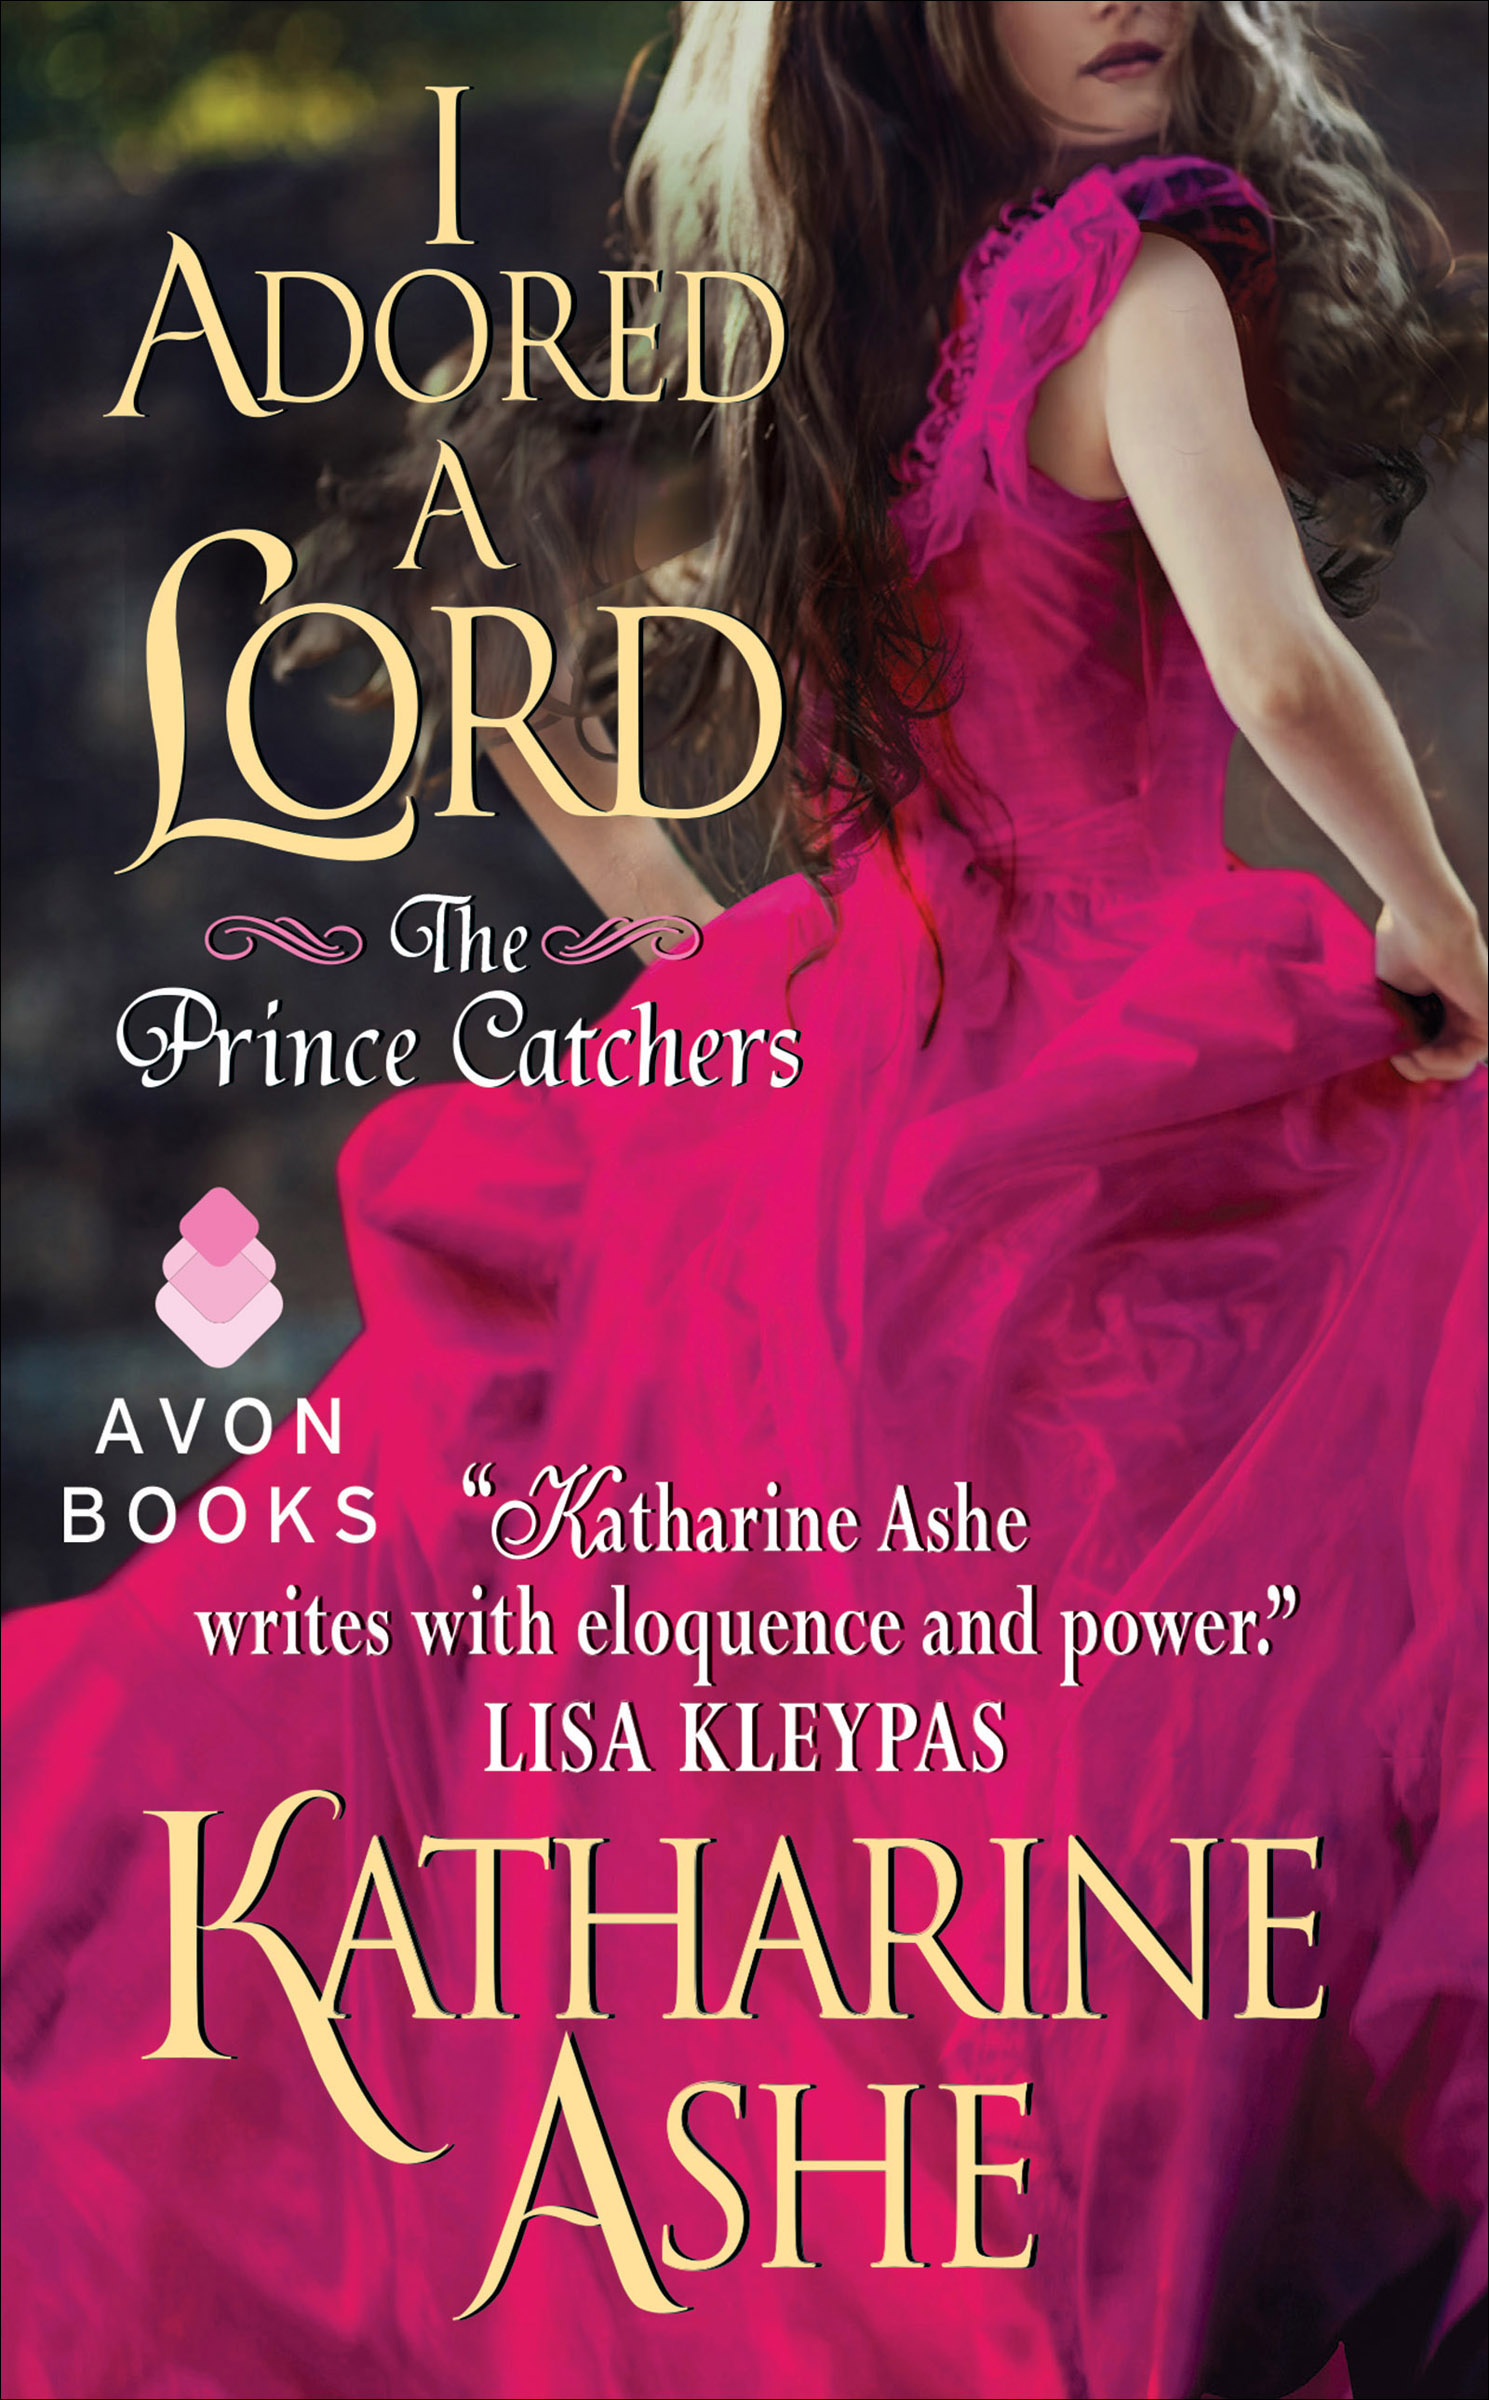 I adored a Lord the prince catchers cover image